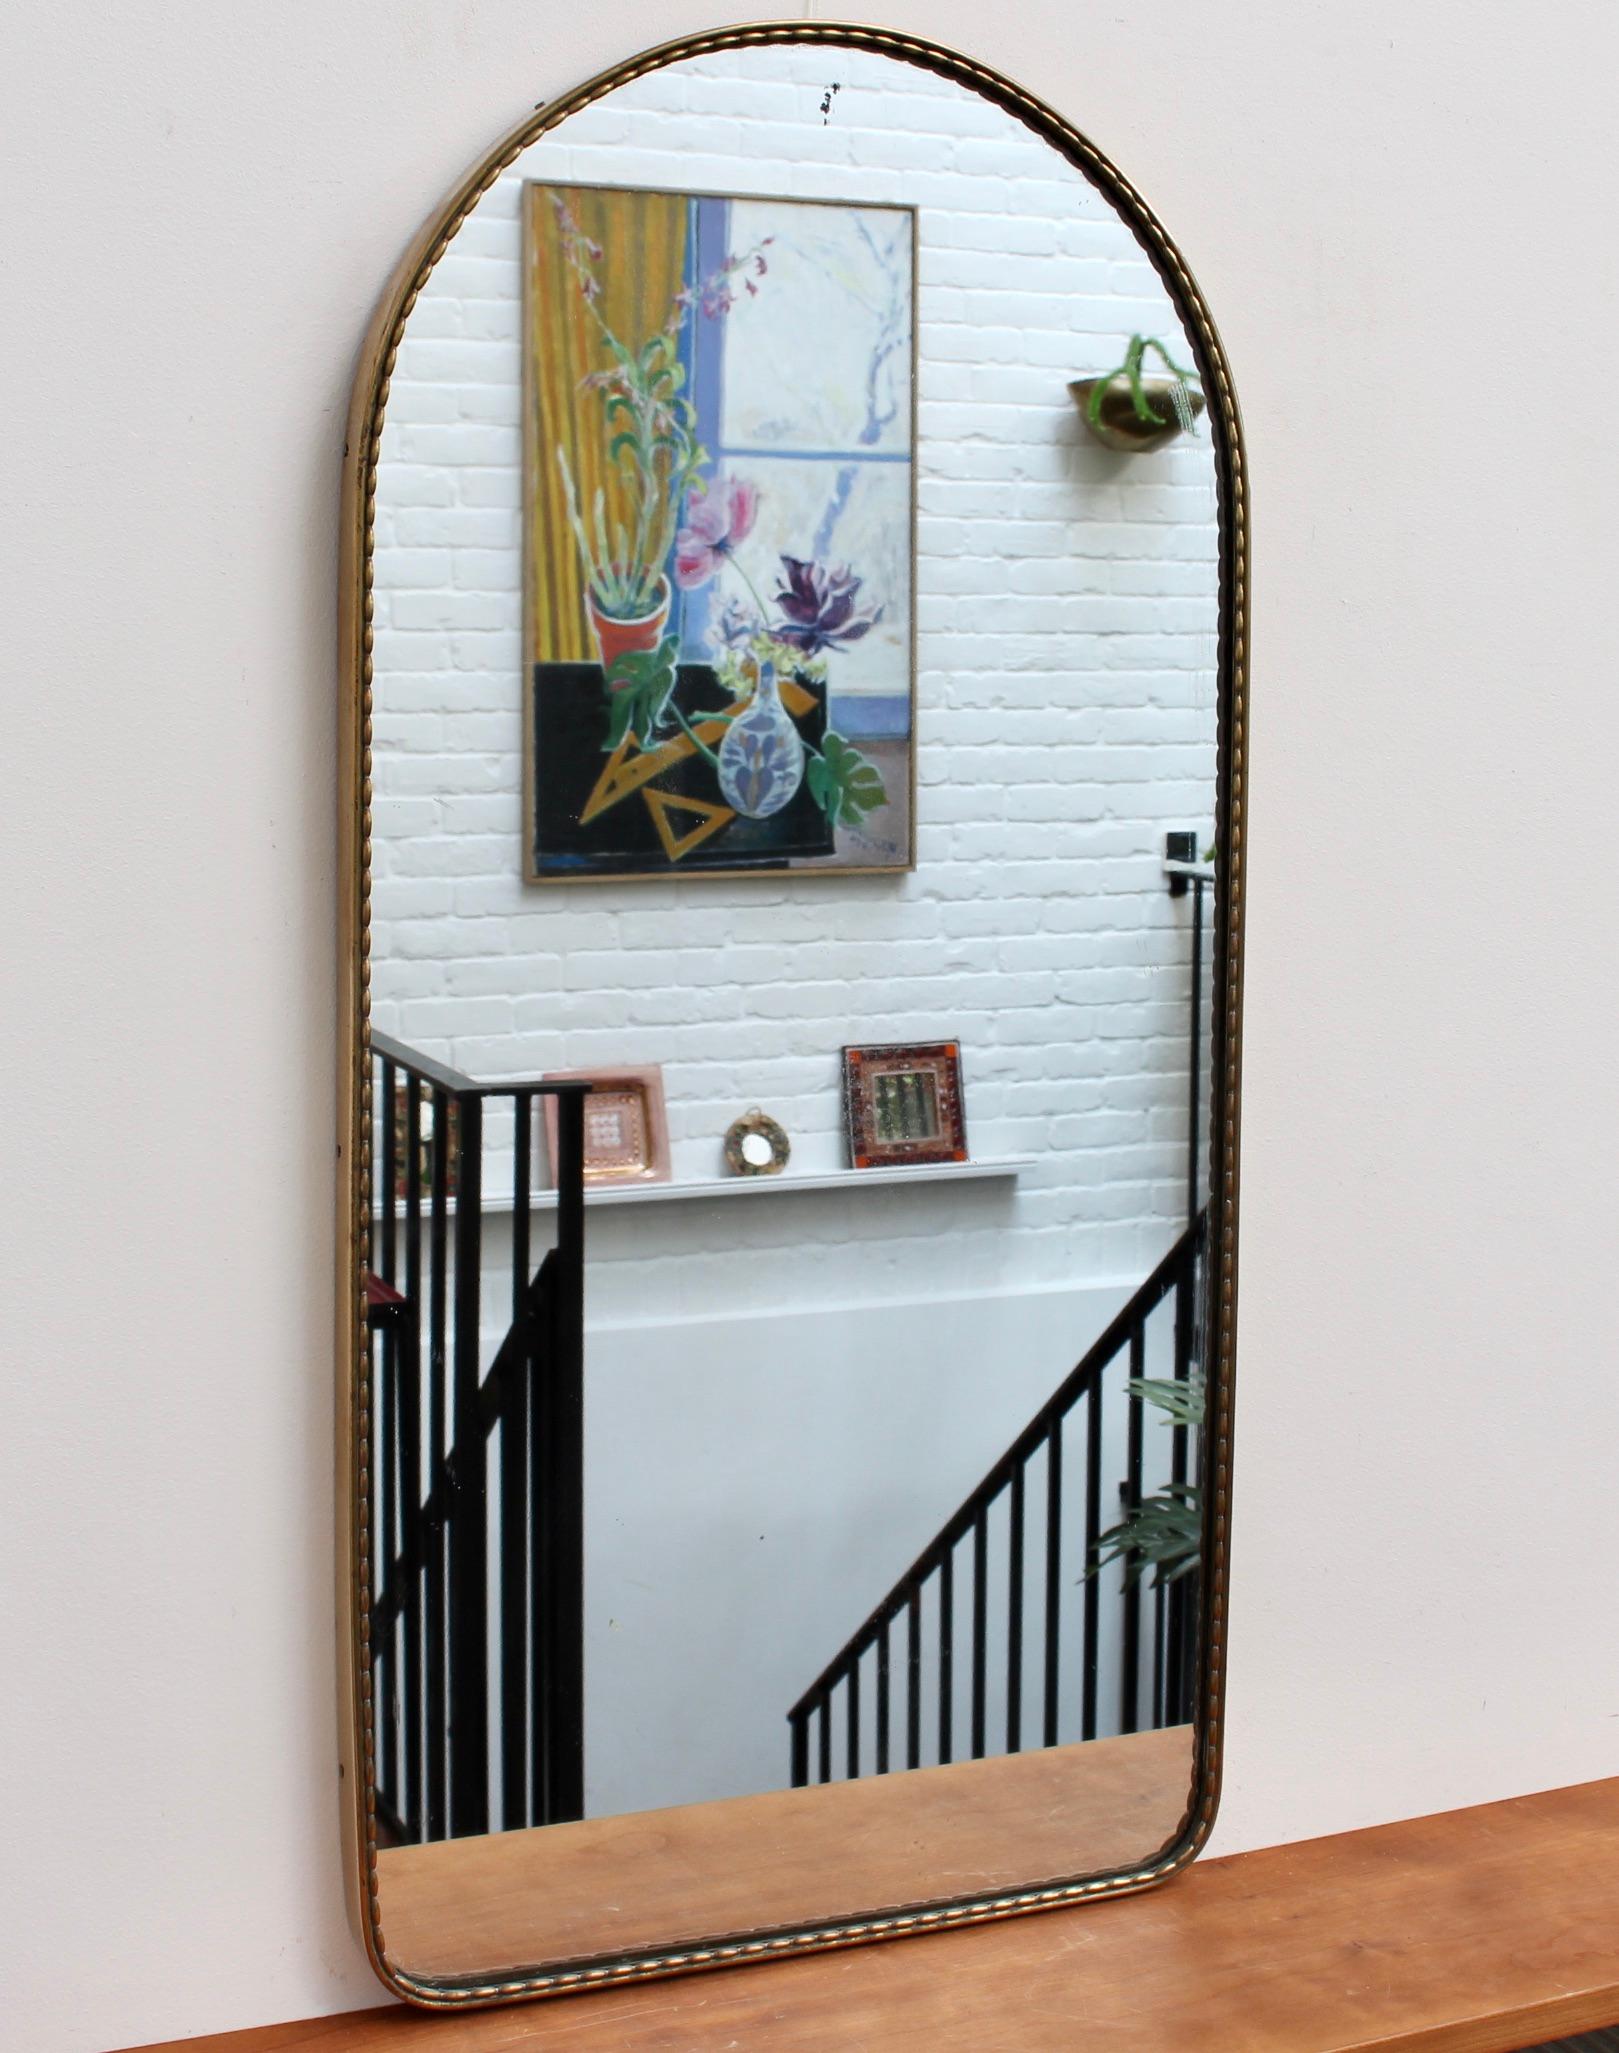 Vintage Italian arch-shaped wall mirror with brass frame and distinctive beading (circa 1950s). The mirror has both a ruggedness and elegant good looks all at once. It is in overall fair vintage condition presenting an aged patina with characterful